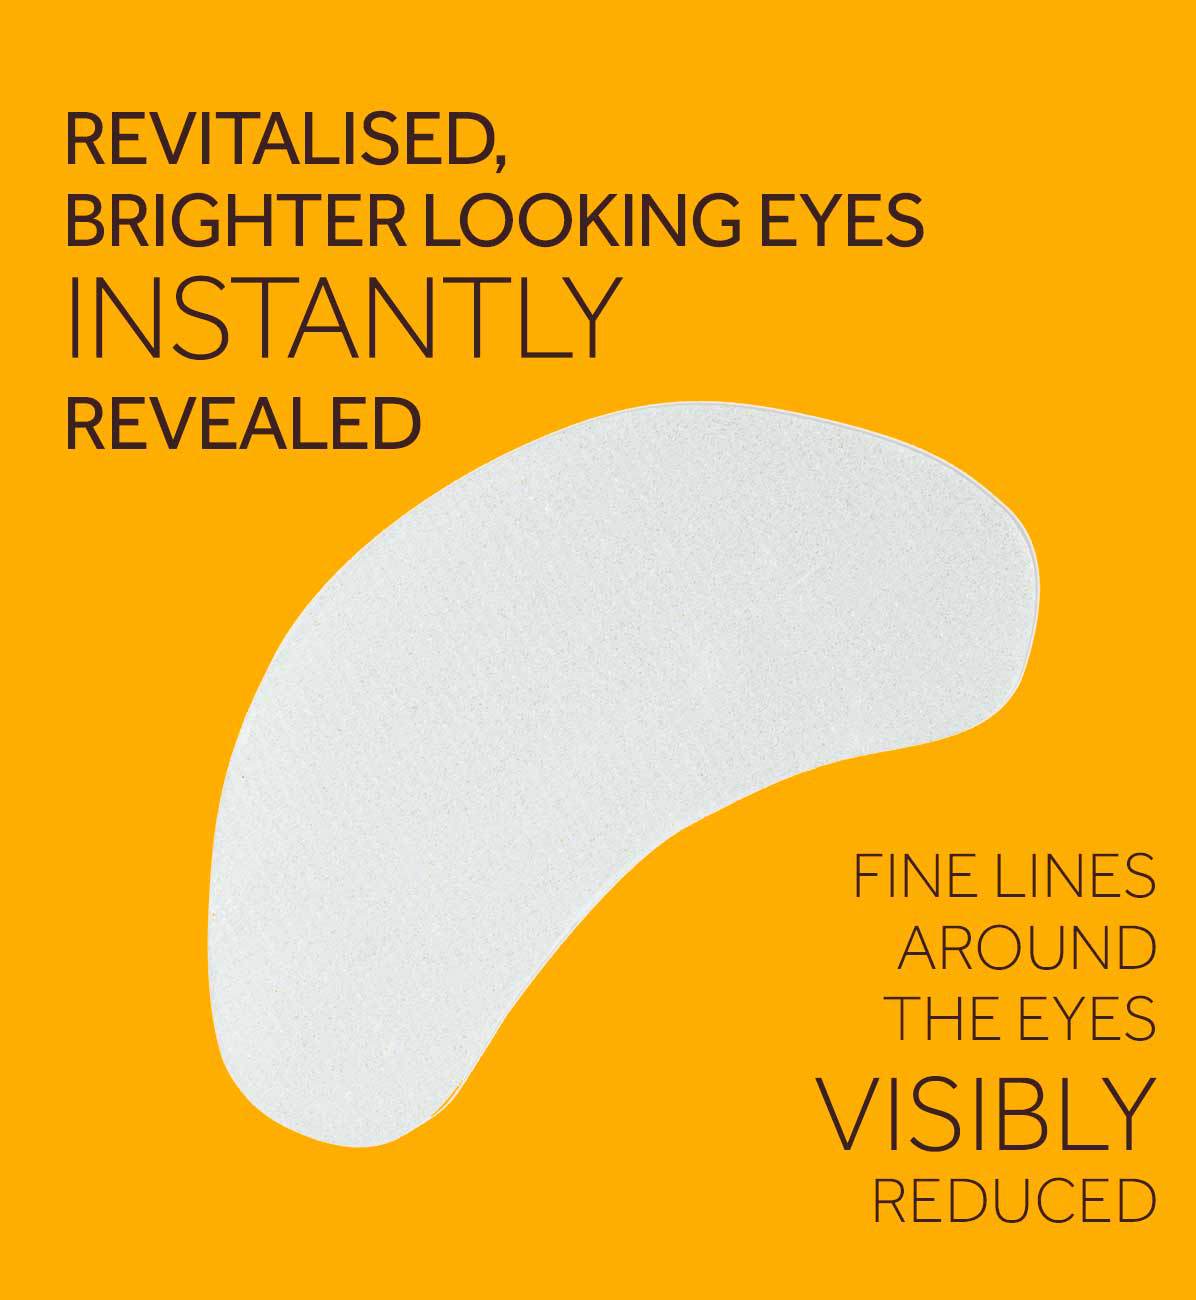 revitalised brighter looking eyes instantly revealed. Fine lines around the eyes visibly reduced